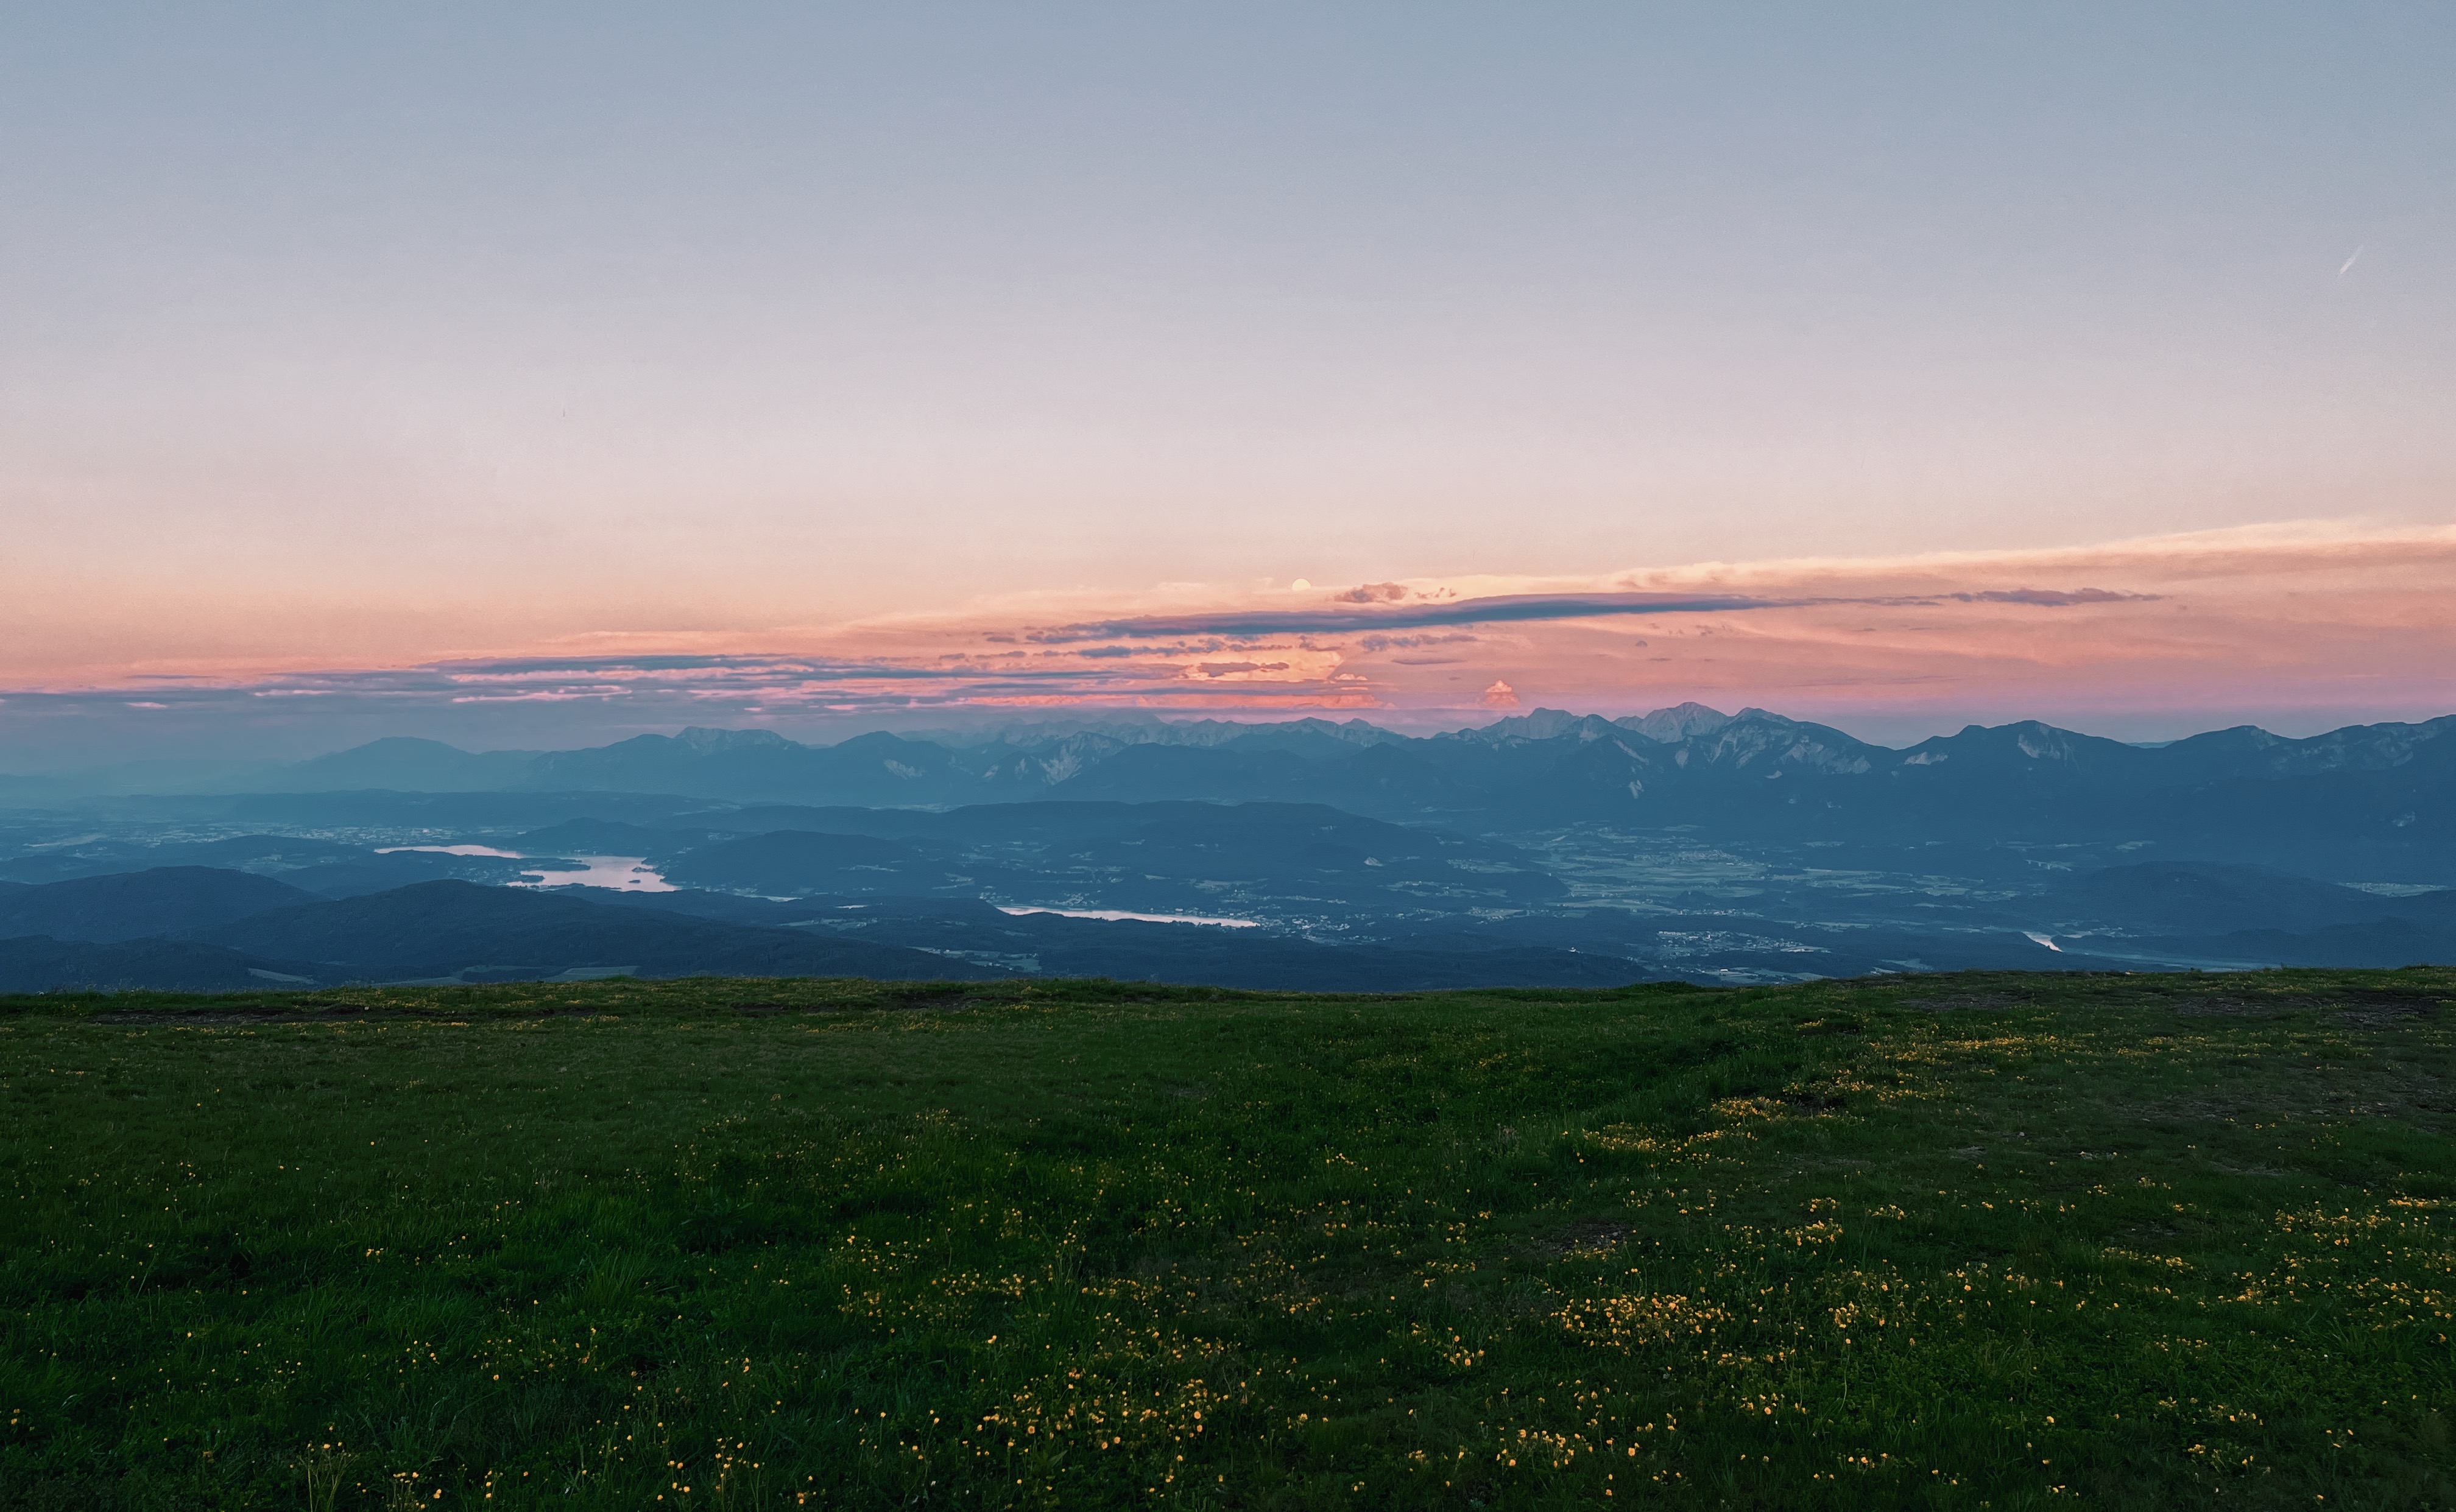 Sunset and moonrise from Gerlitzen Alpe in Austria on the Alpe Adria Trail, the best thru-hiking trail for beginners